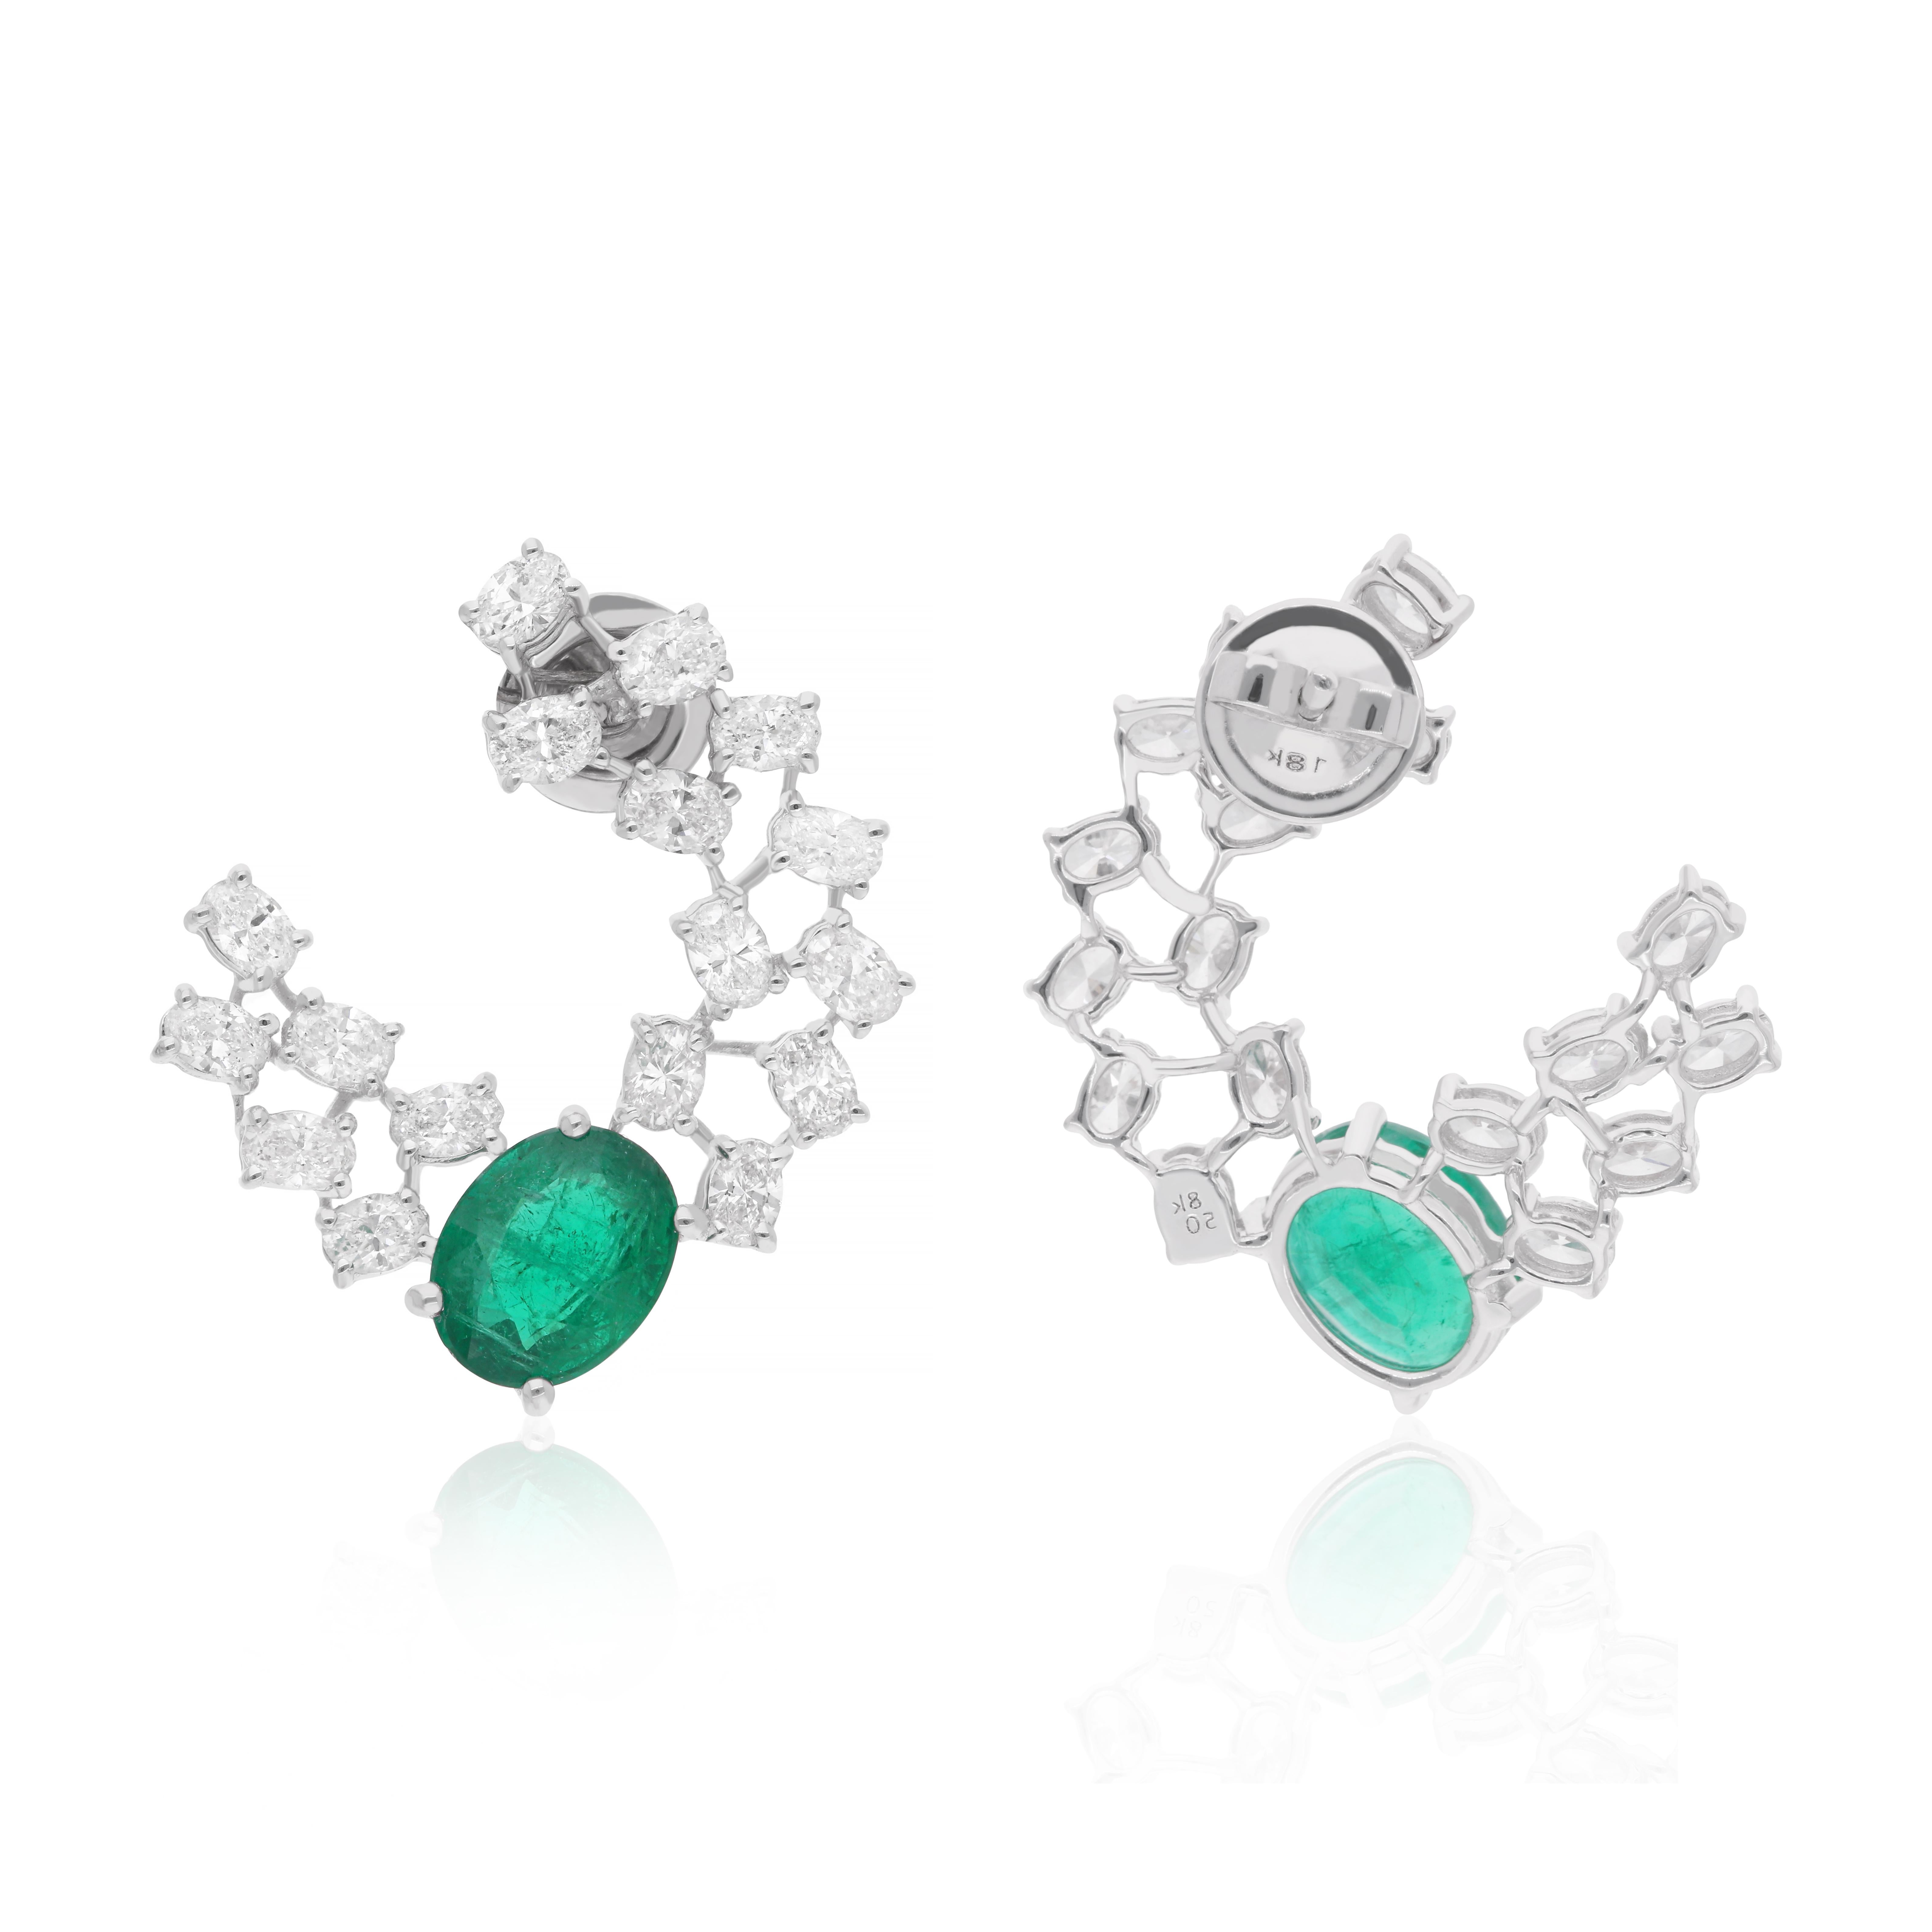 Crafted with care and attention to detail, these earrings are a true work of art, destined to become cherished heirlooms passed down through generations. They symbolize timeless beauty, sophistication, and luxury, making them a quintessential